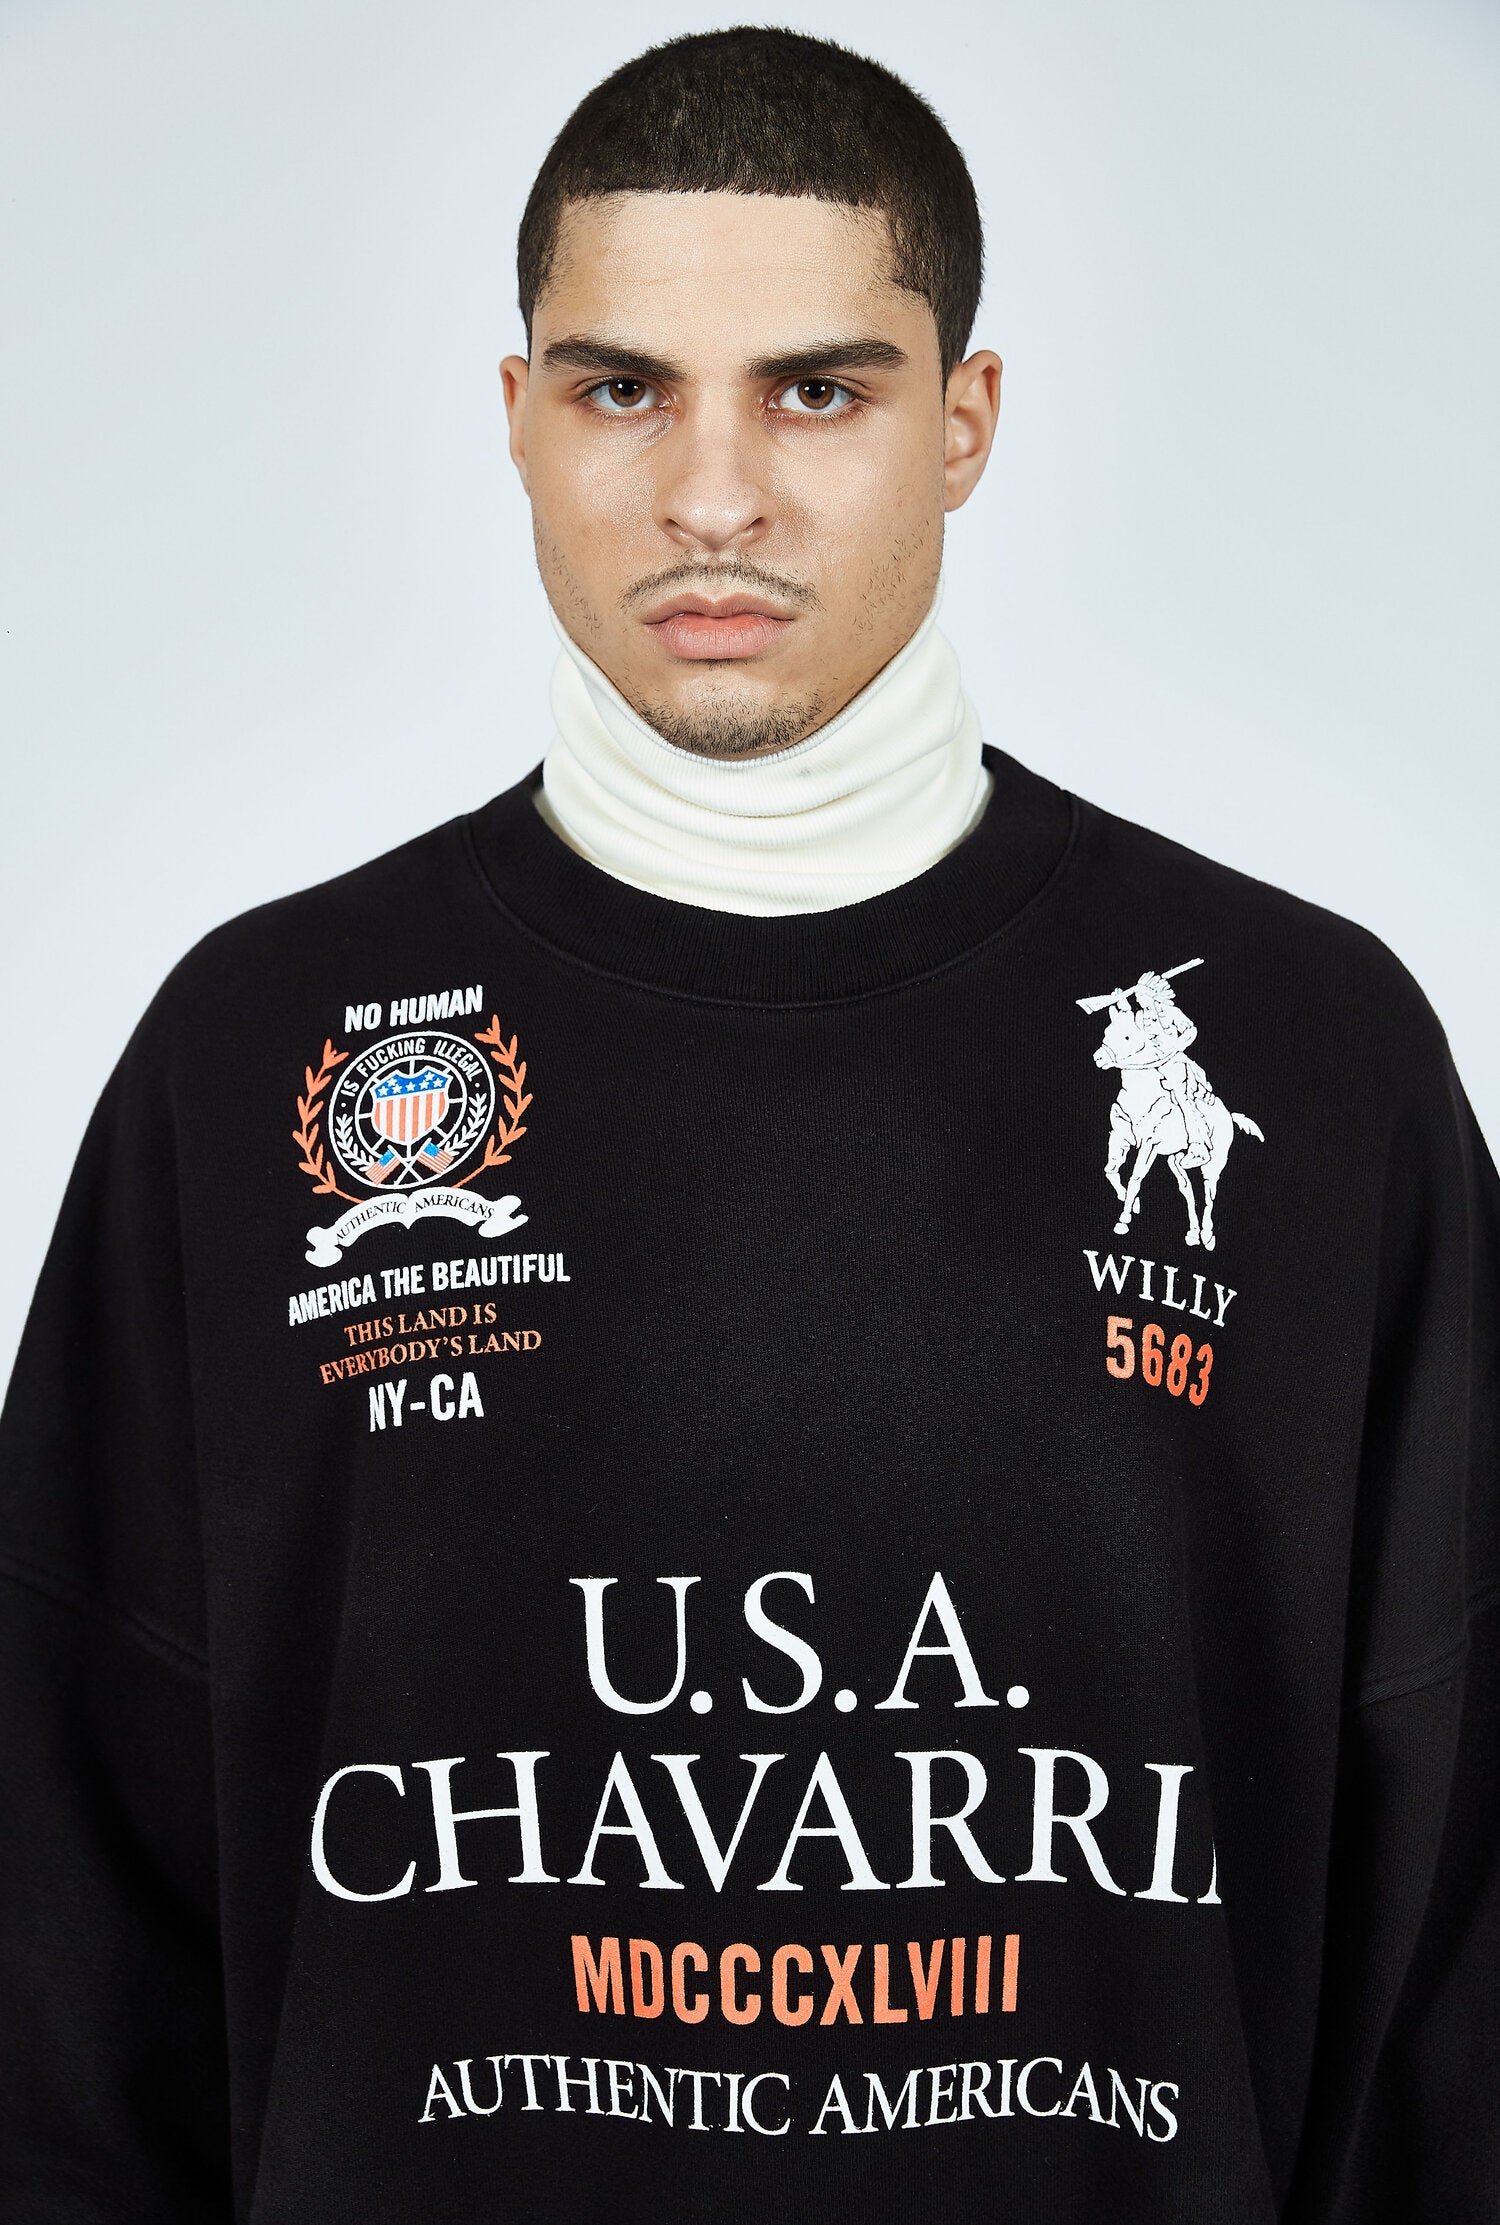 <span style="color: #f50b0b;">Last One</span> 【RESTOCK】 WILLY CHAVARRIA /CANAL STREET RUFF NECK LS